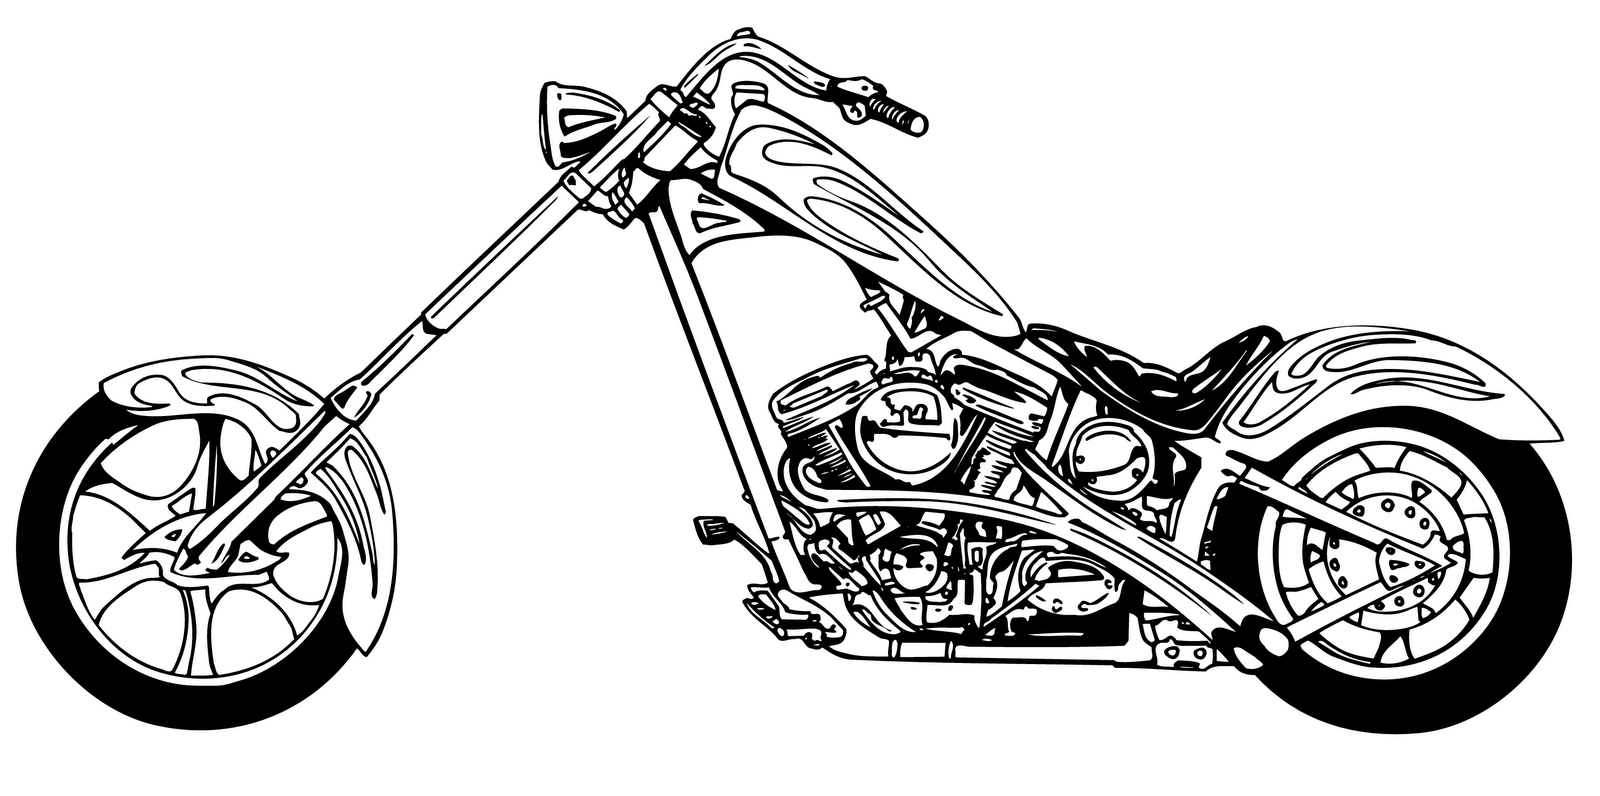 Free Motorcycle Image, Download Free Clip Art, Free Clip Art